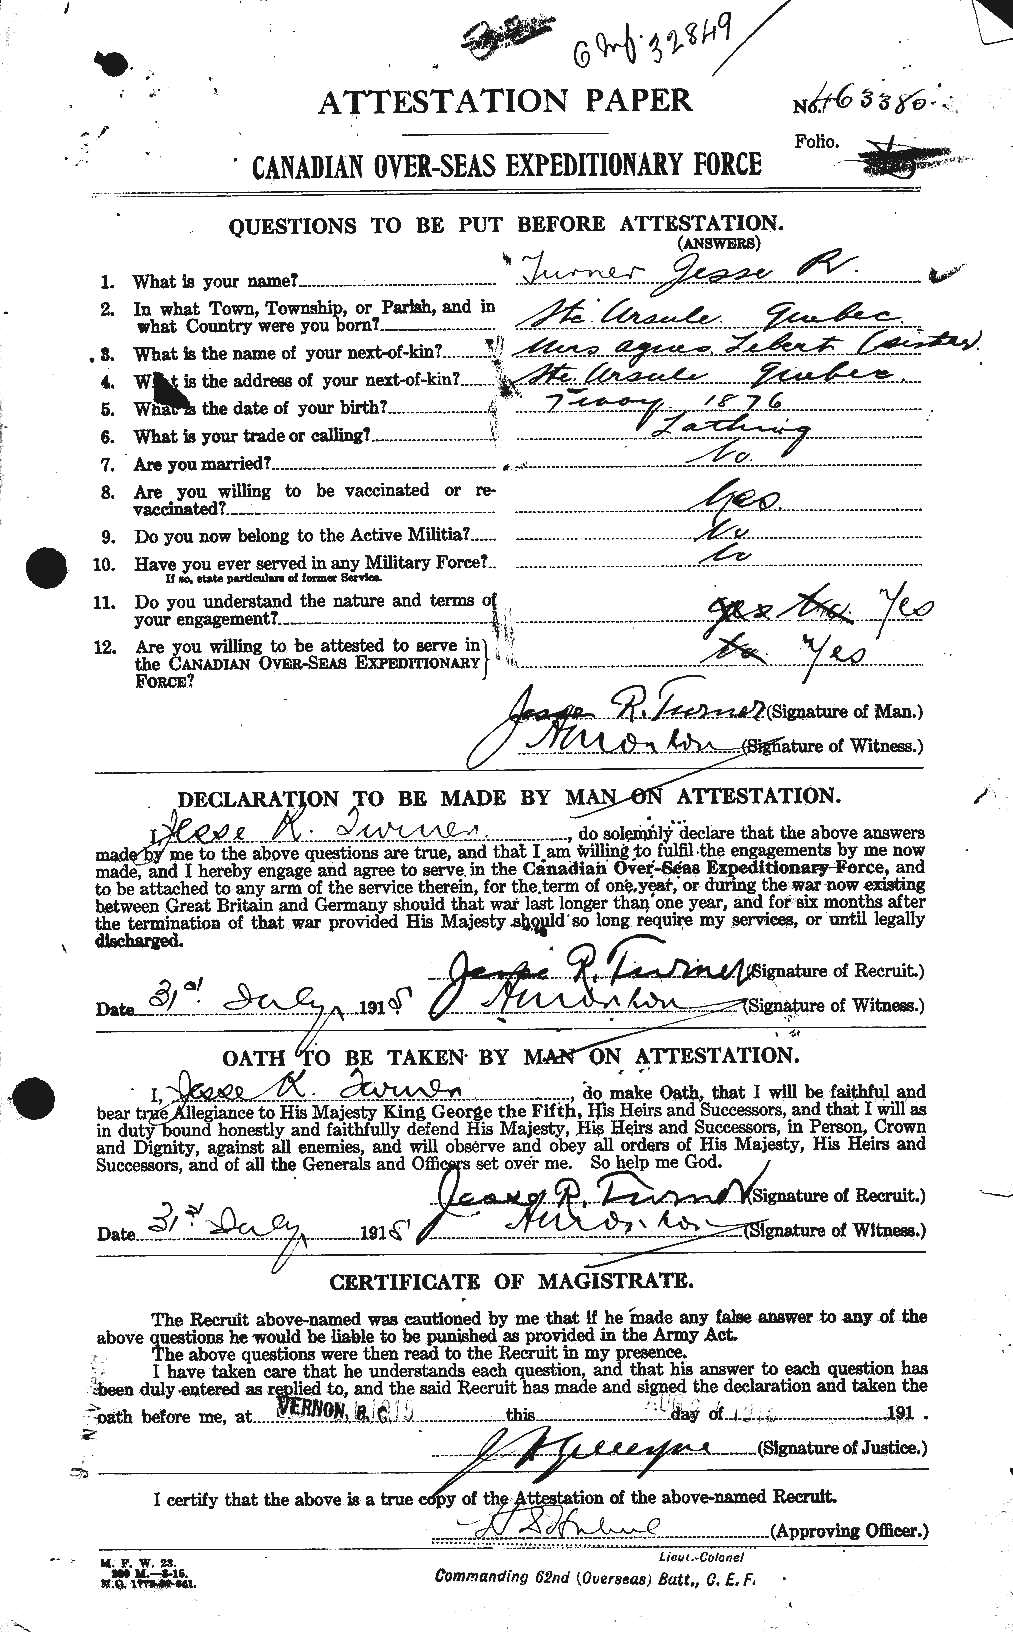 Personnel Records of the First World War - CEF 642028a